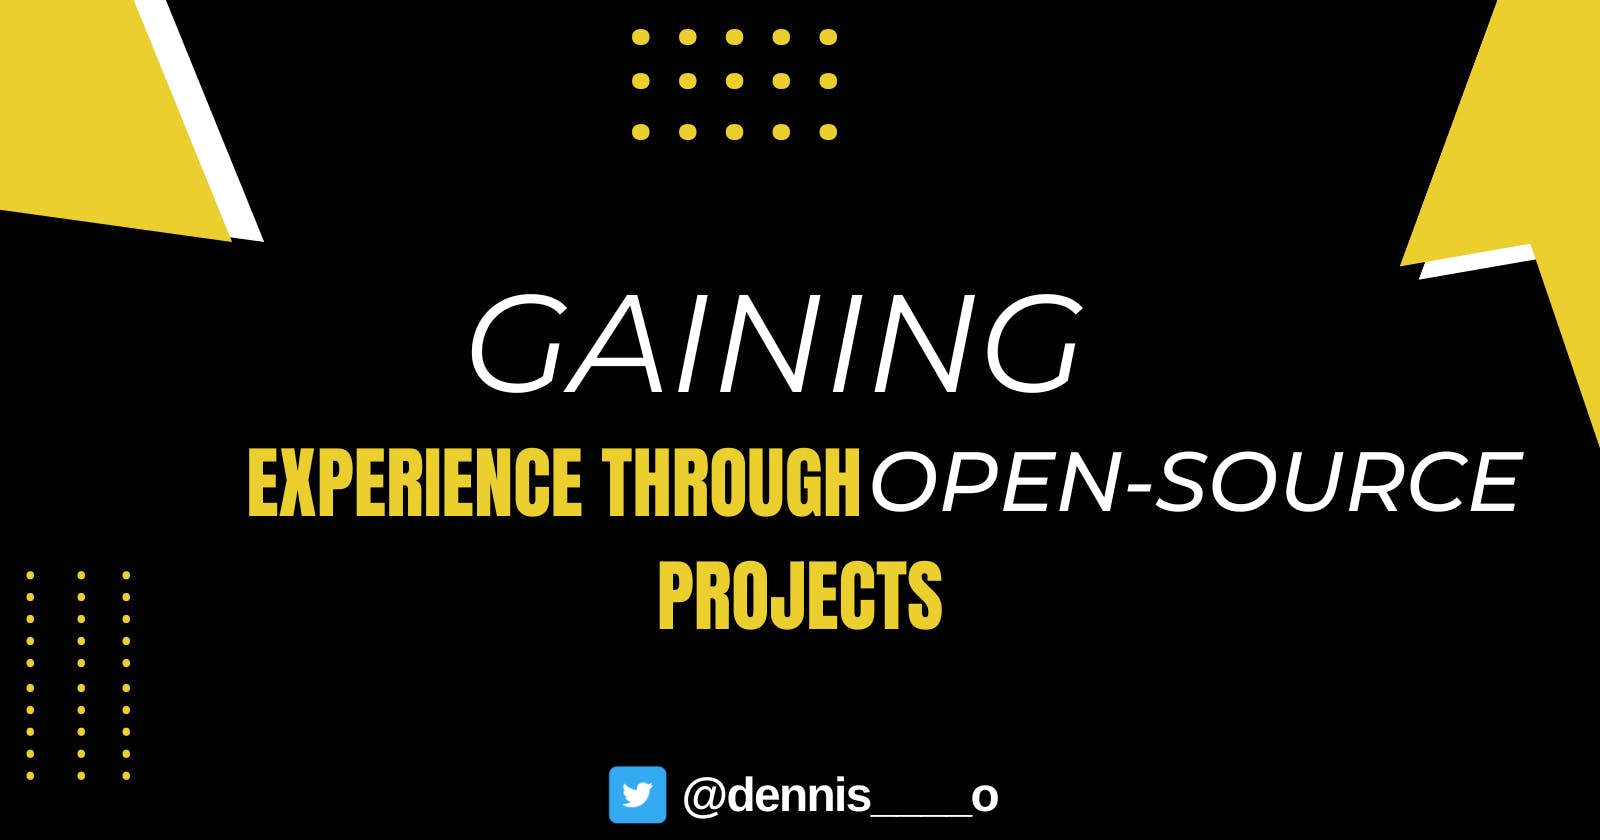 Gaining experience through open-source projects